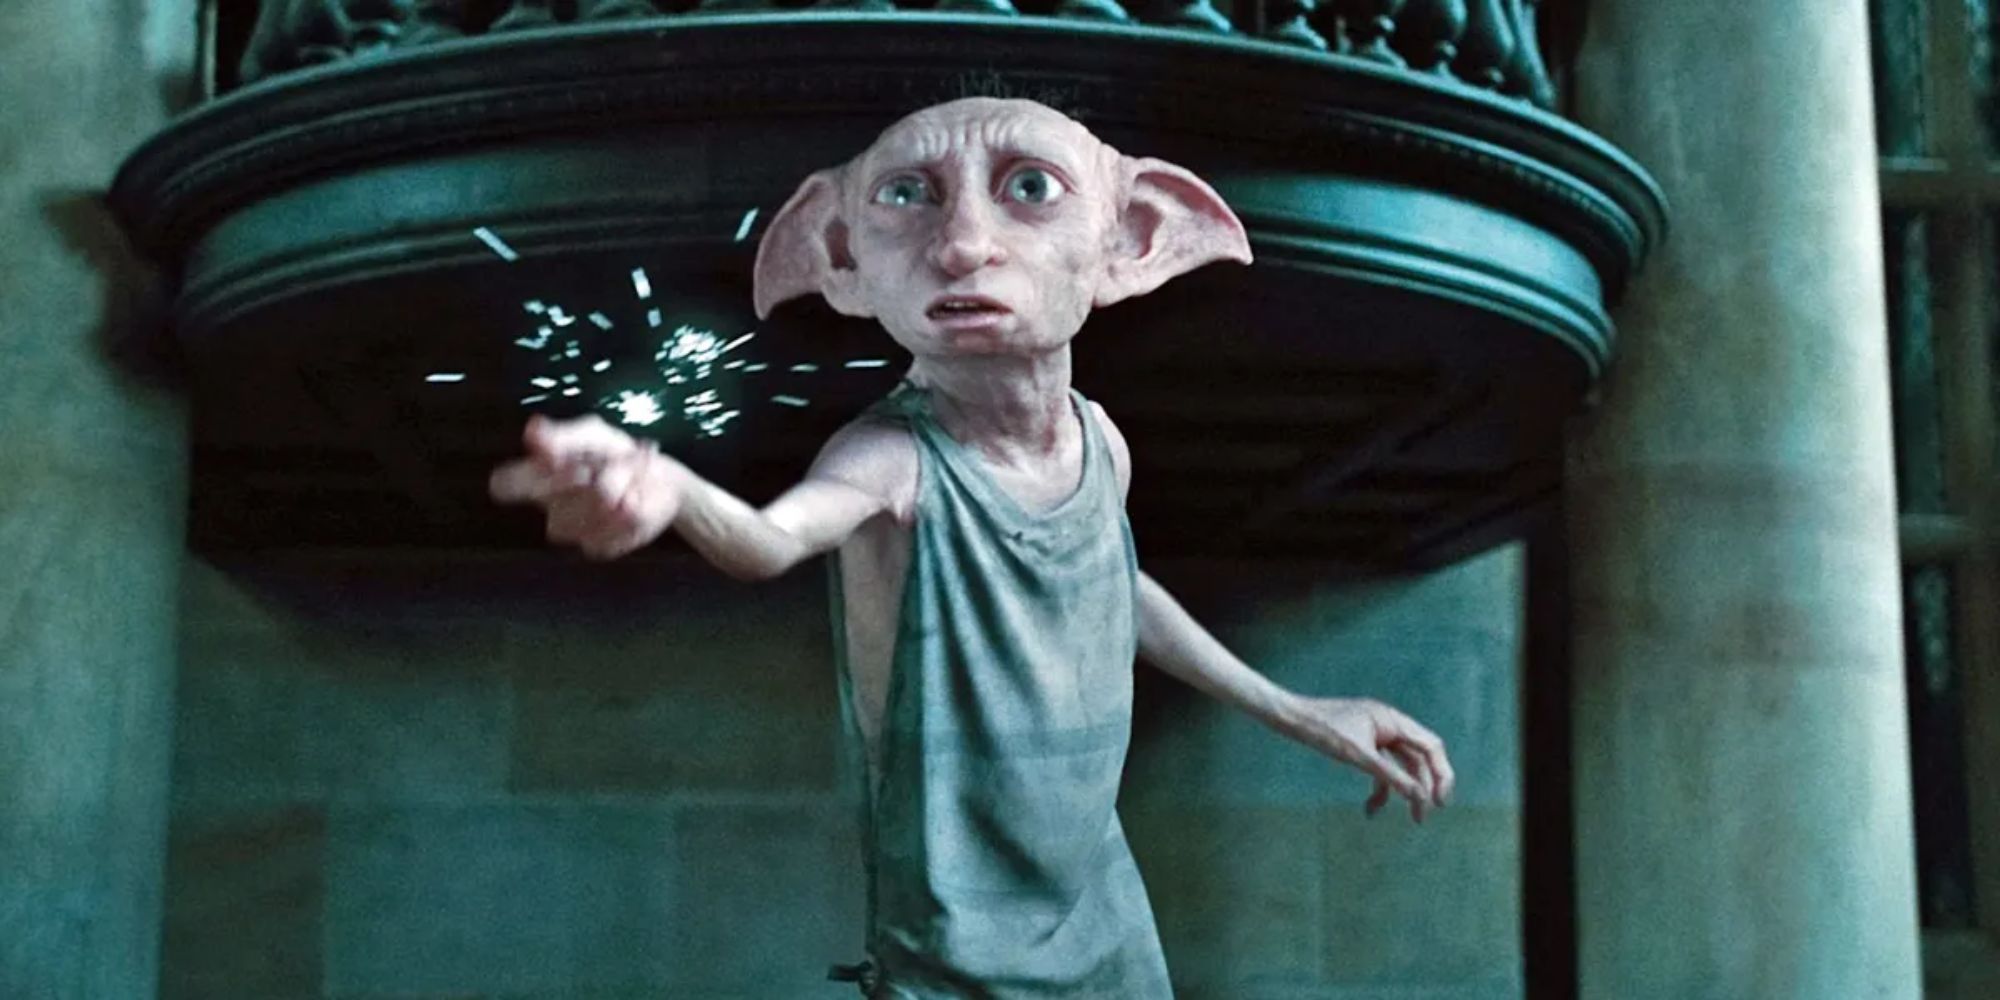 Magic is emitted from Dobby's fingers as he snaps 